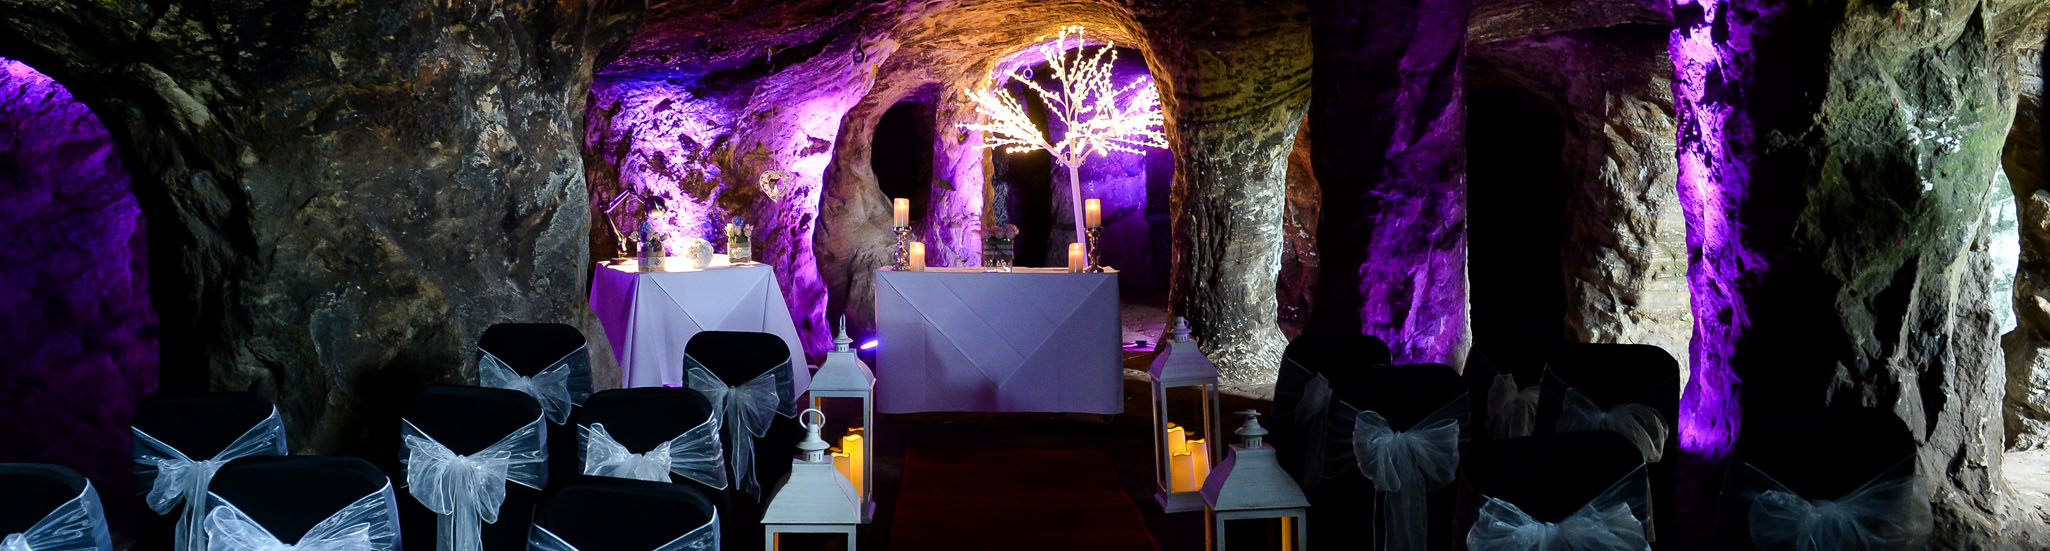 Wedding in the Grotto at Hawkstone Park Follies Shropshire